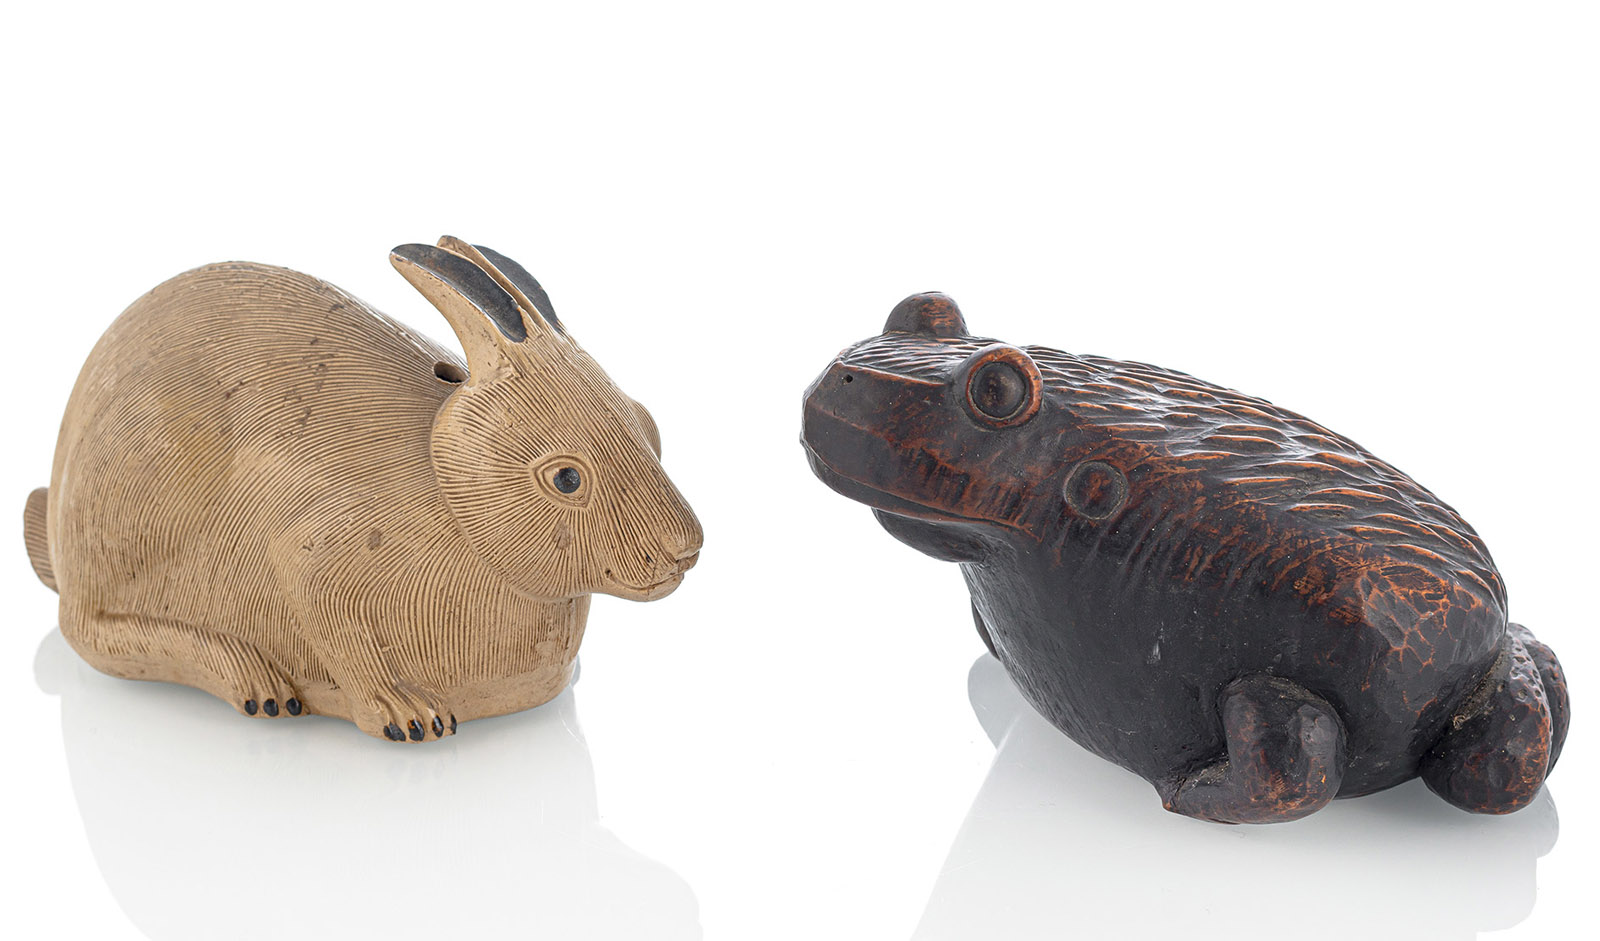 TWO WOOD AND BIZEN WARE SCULPTURES OF A RABBIT AND A TOAD